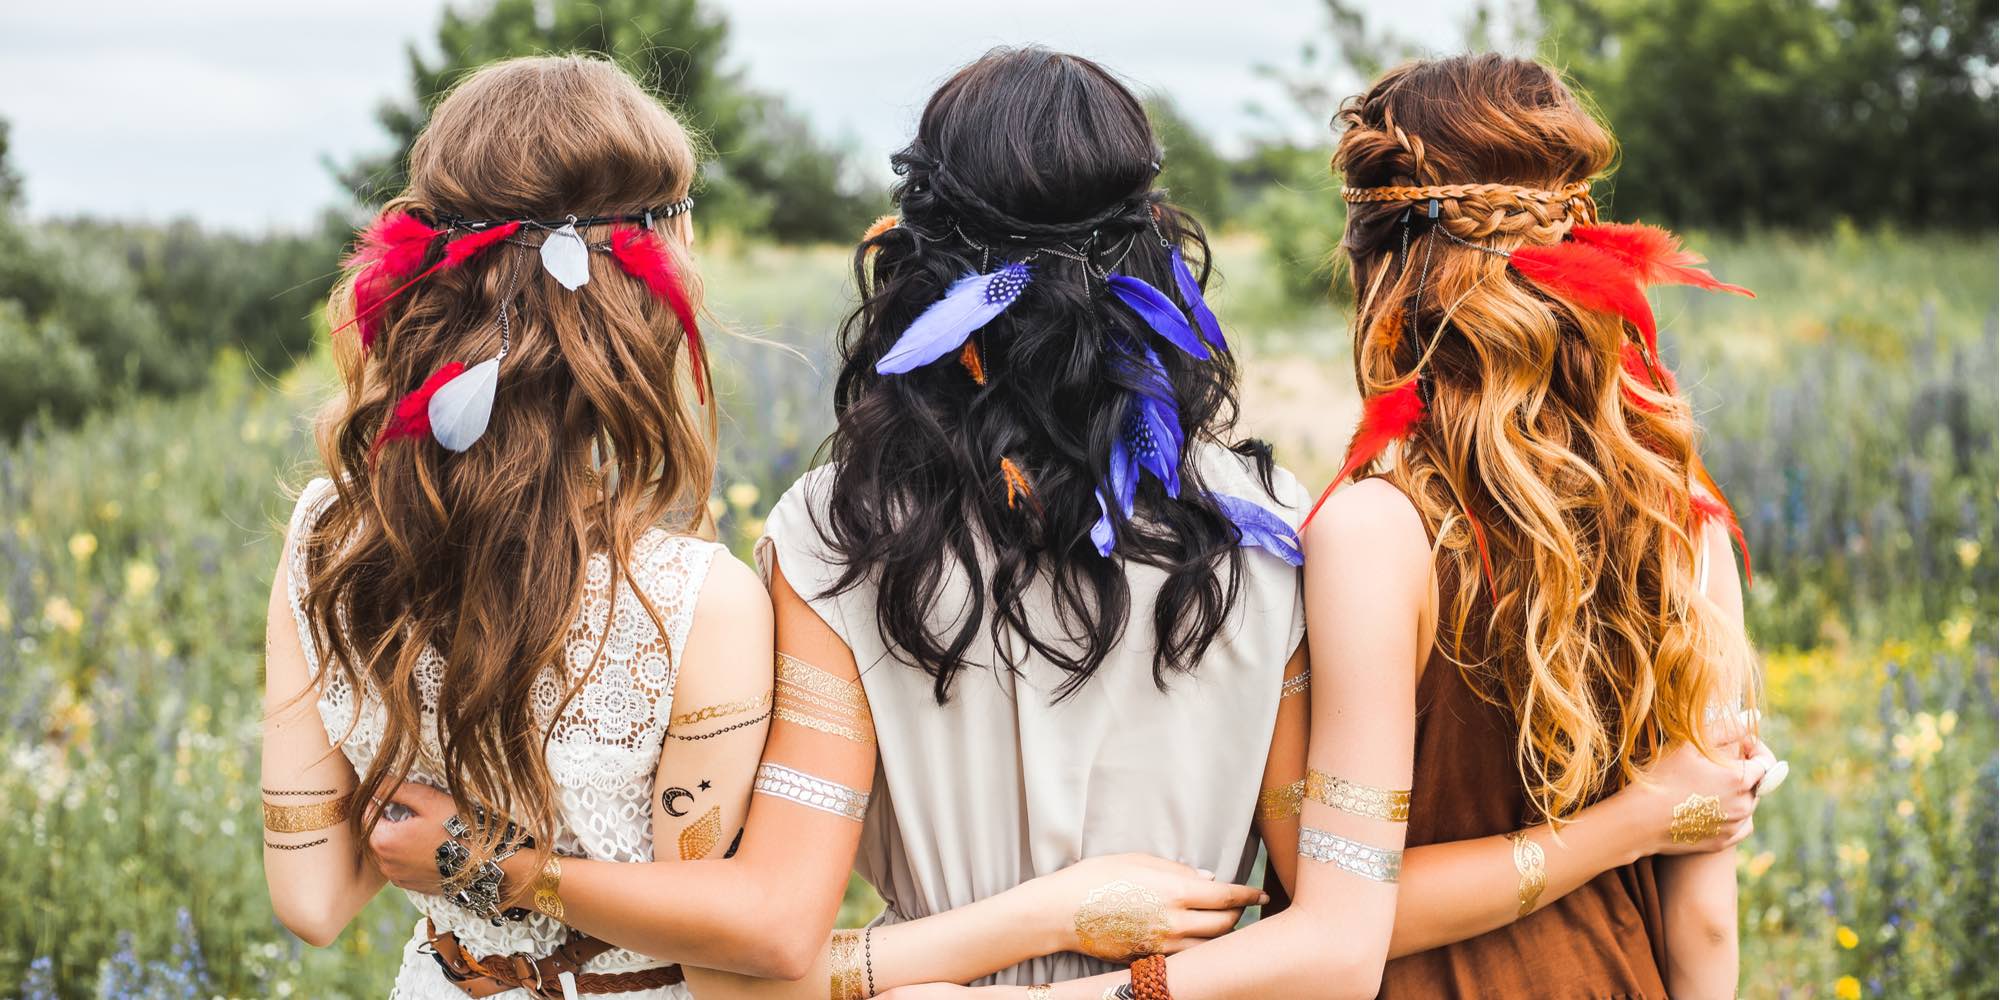 Coachella Hairstyles That Don&#039;t Need a Flower Crown | Luulla